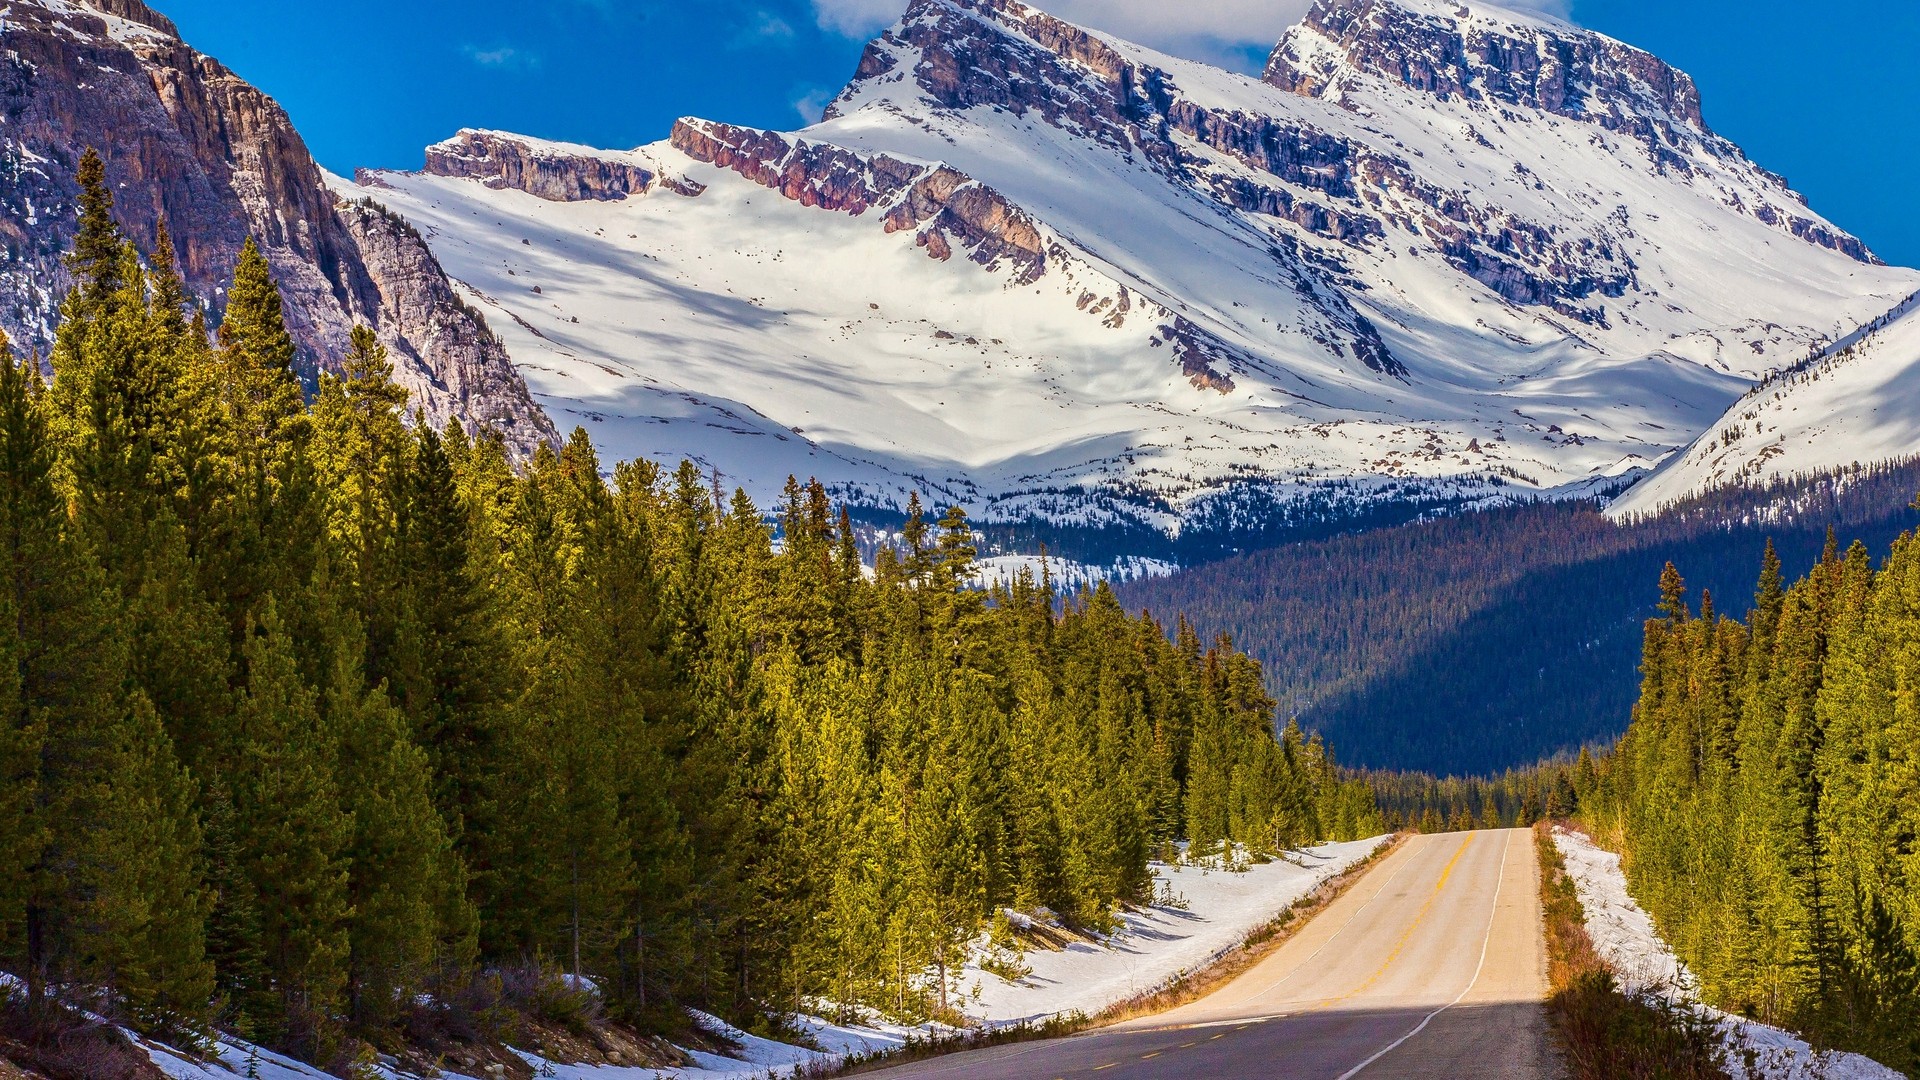 1920x1080 wallpapers: alberta, canada, banff national park, mountains, snow, distance (image)